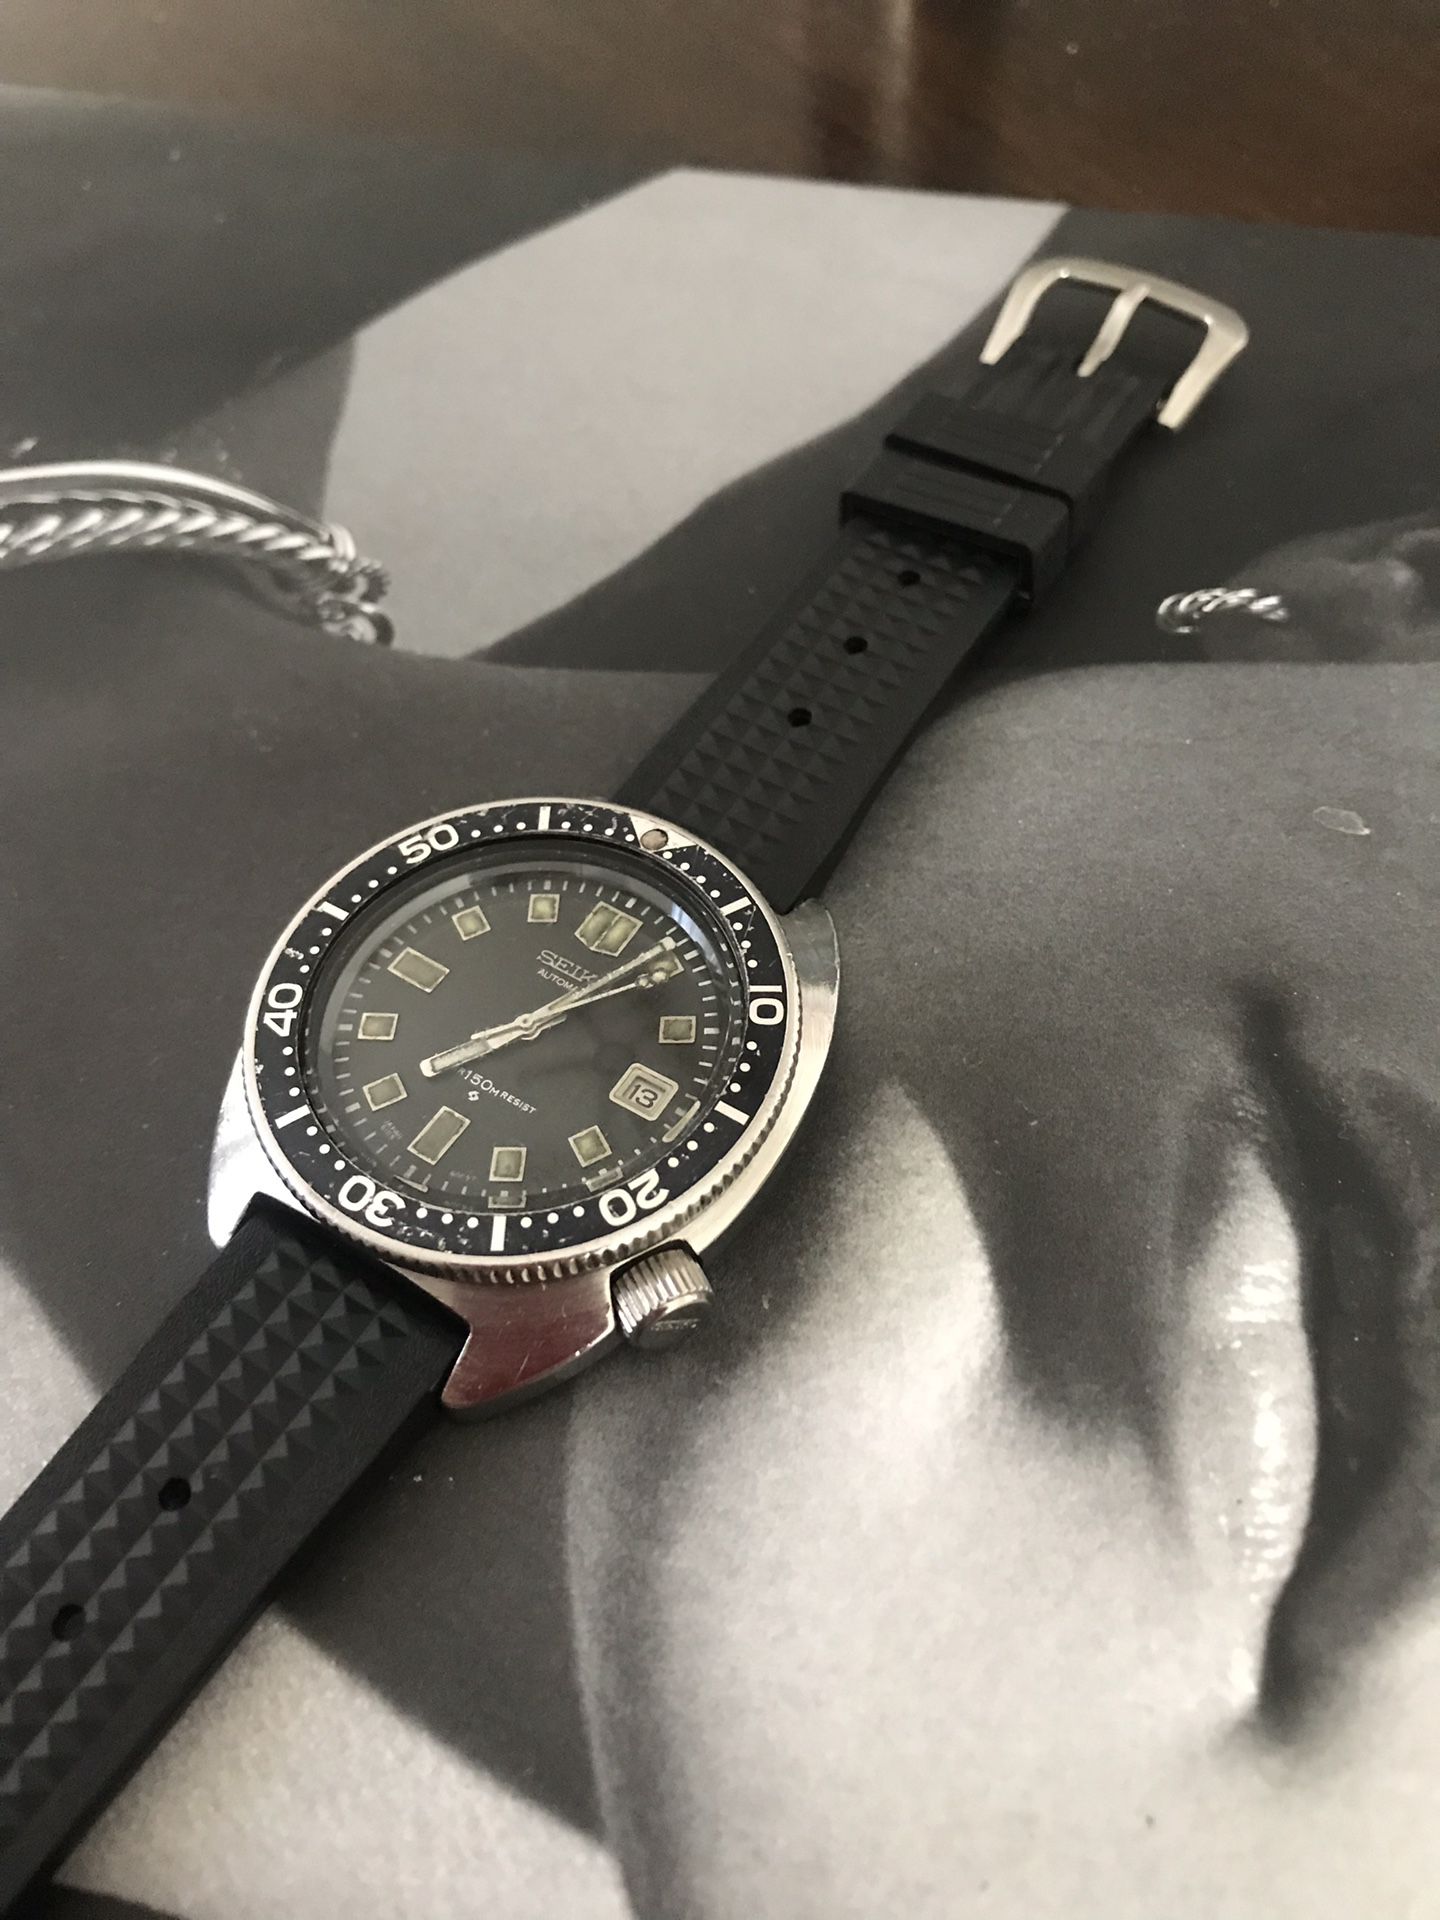 Seiko 1605 vintage dive watch for Sale in Carlsbad, CA - OfferUp